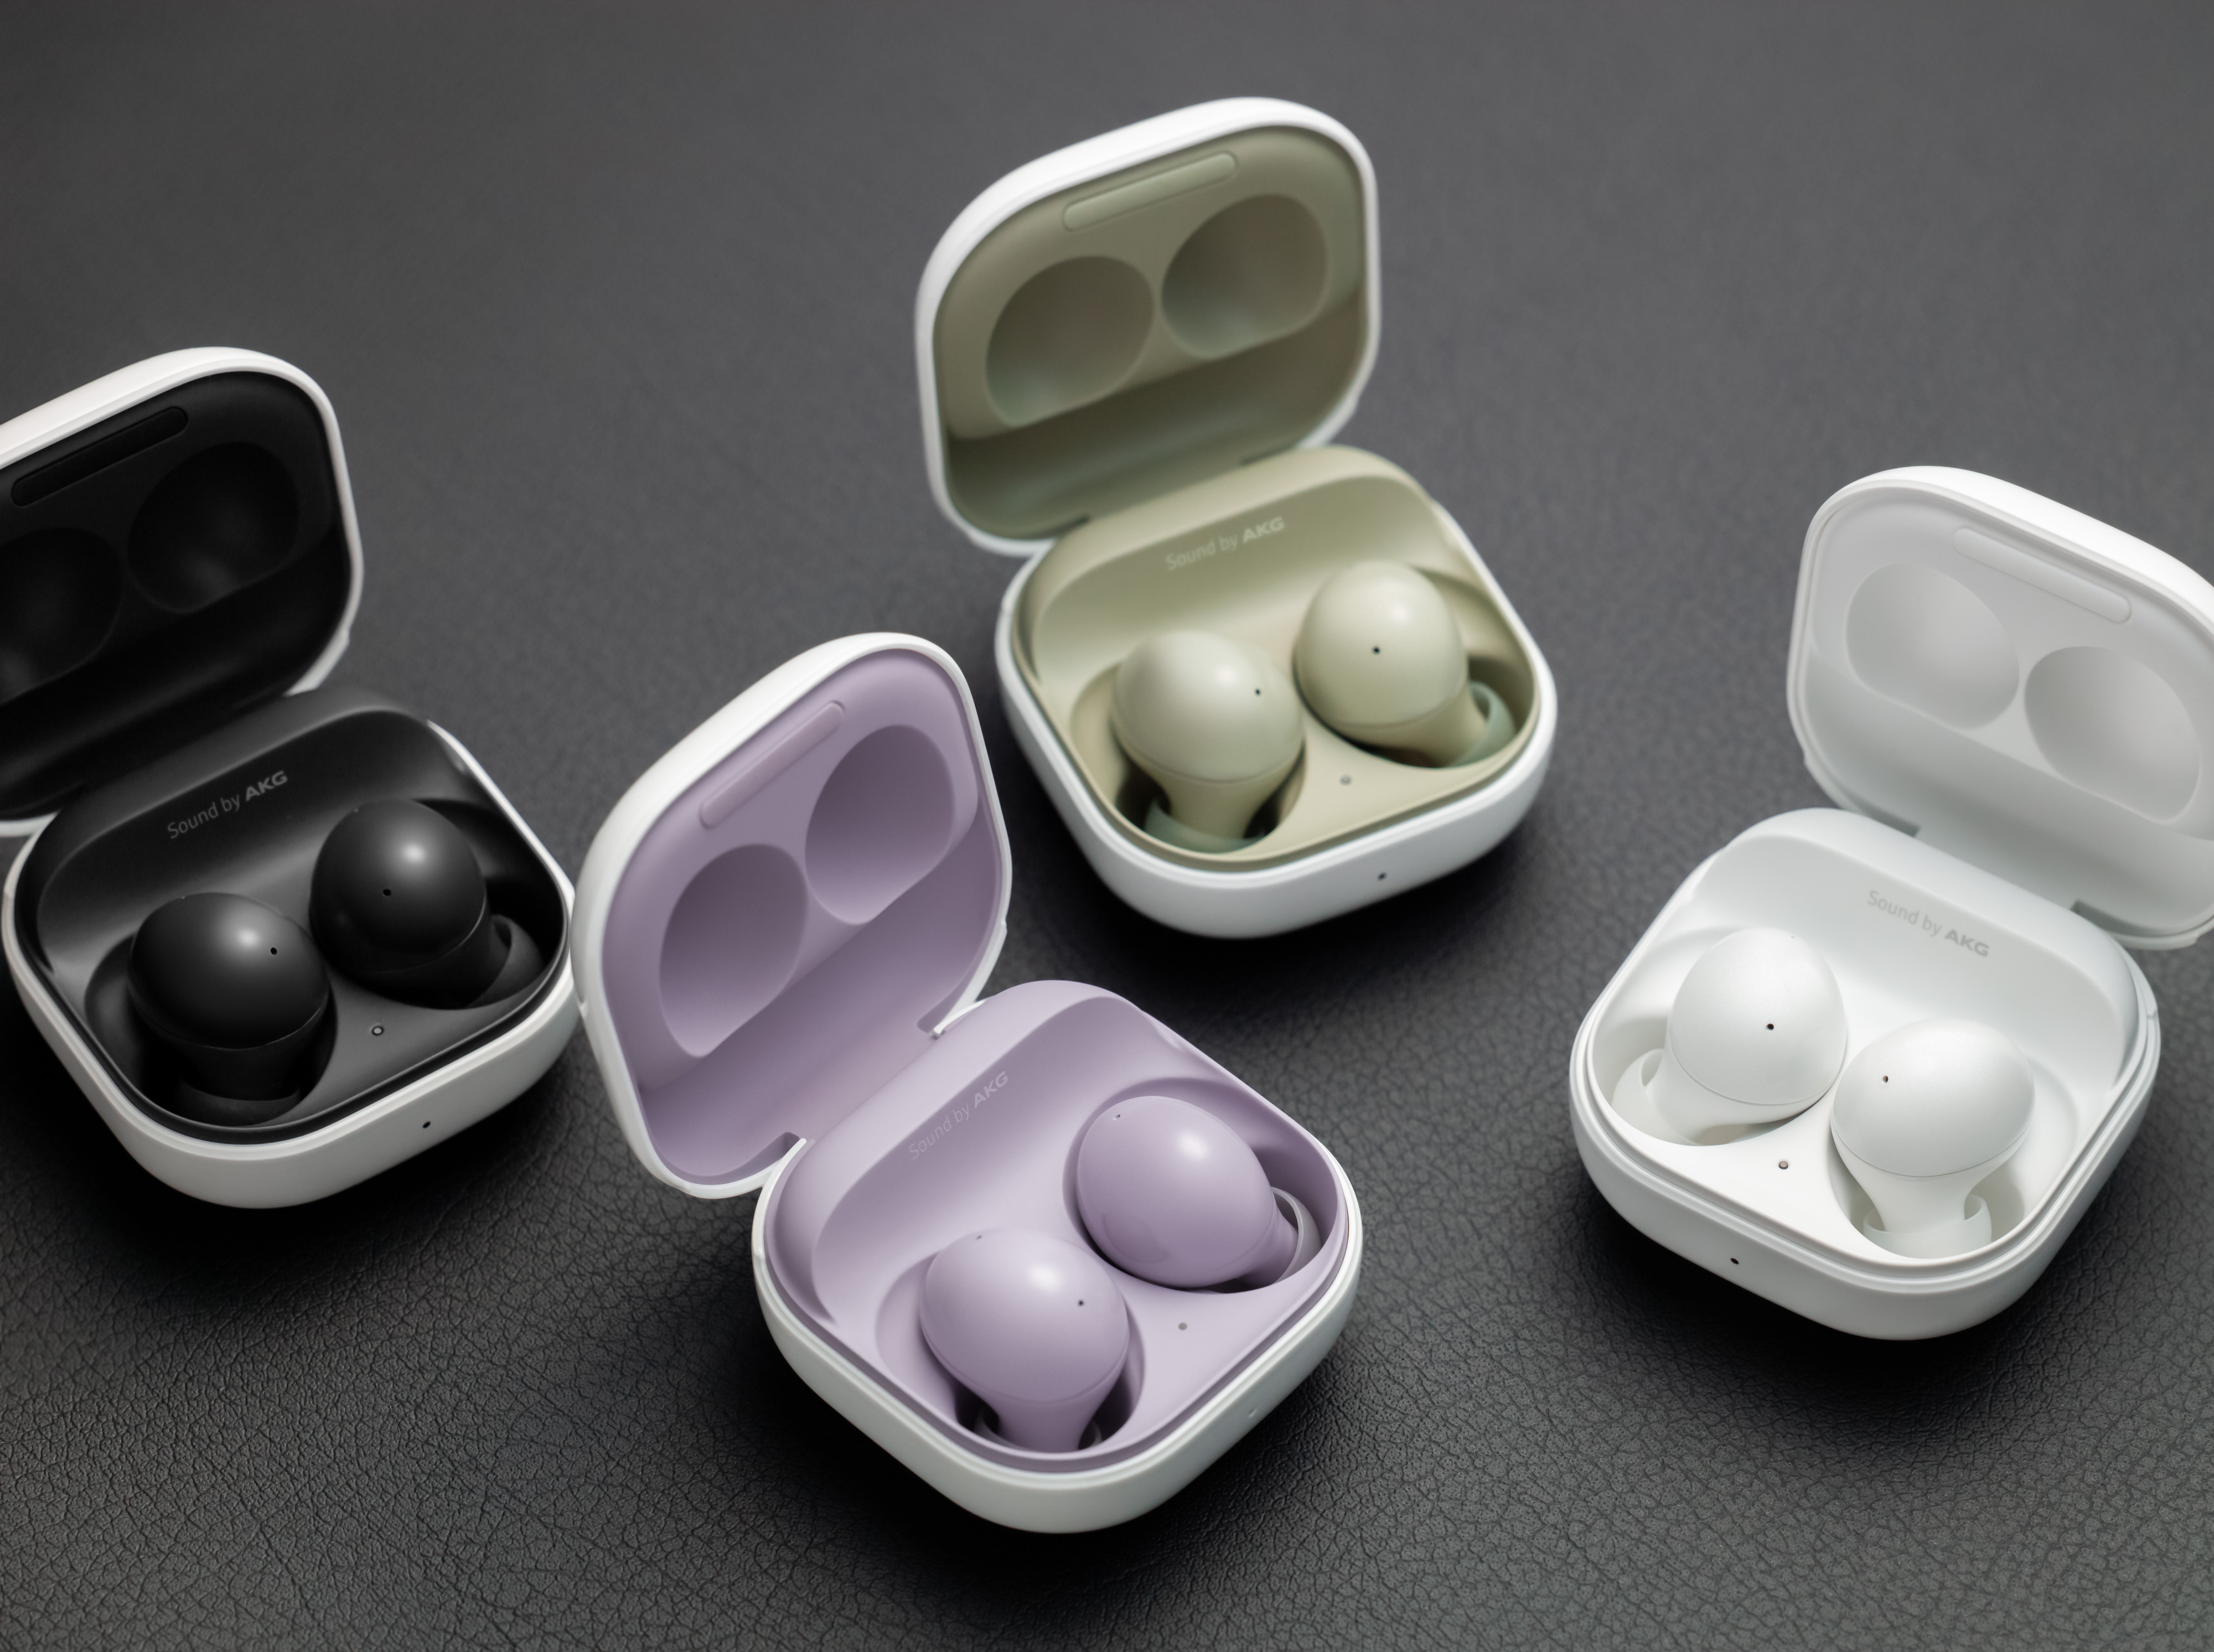 Samsung Galaxy Buds 2 four colors.